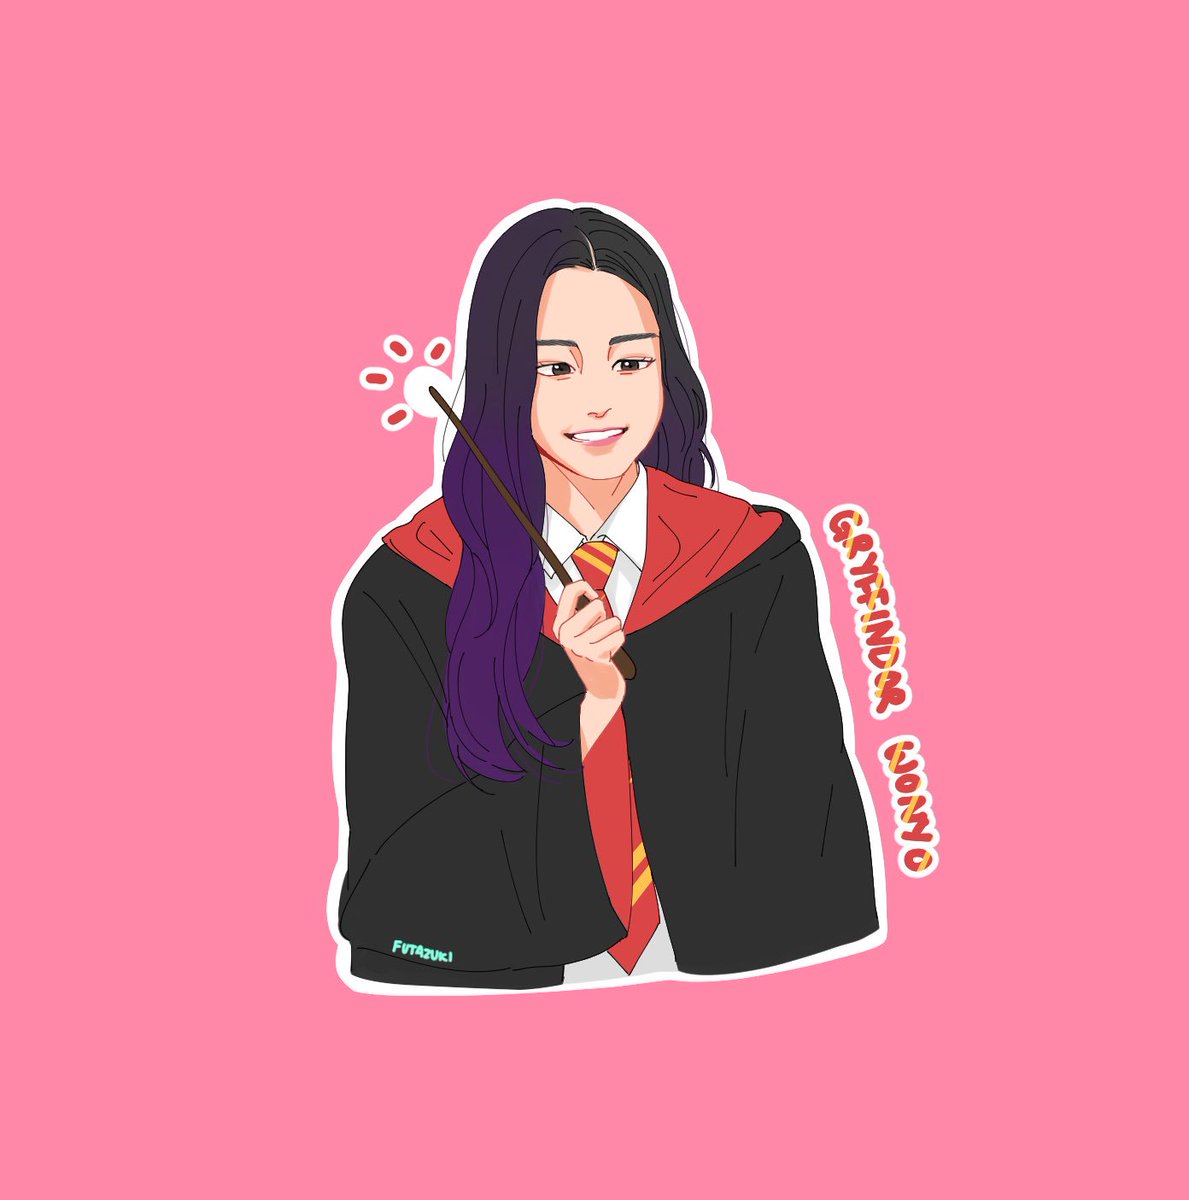 Wonyoung: GryffindorOne of the most talented and youngest wizard there is. Can be too noisy in the dorms since she shares a room with Yujin and Eunbi. #장원영  #JangWonyoung  #チャンウォニョン